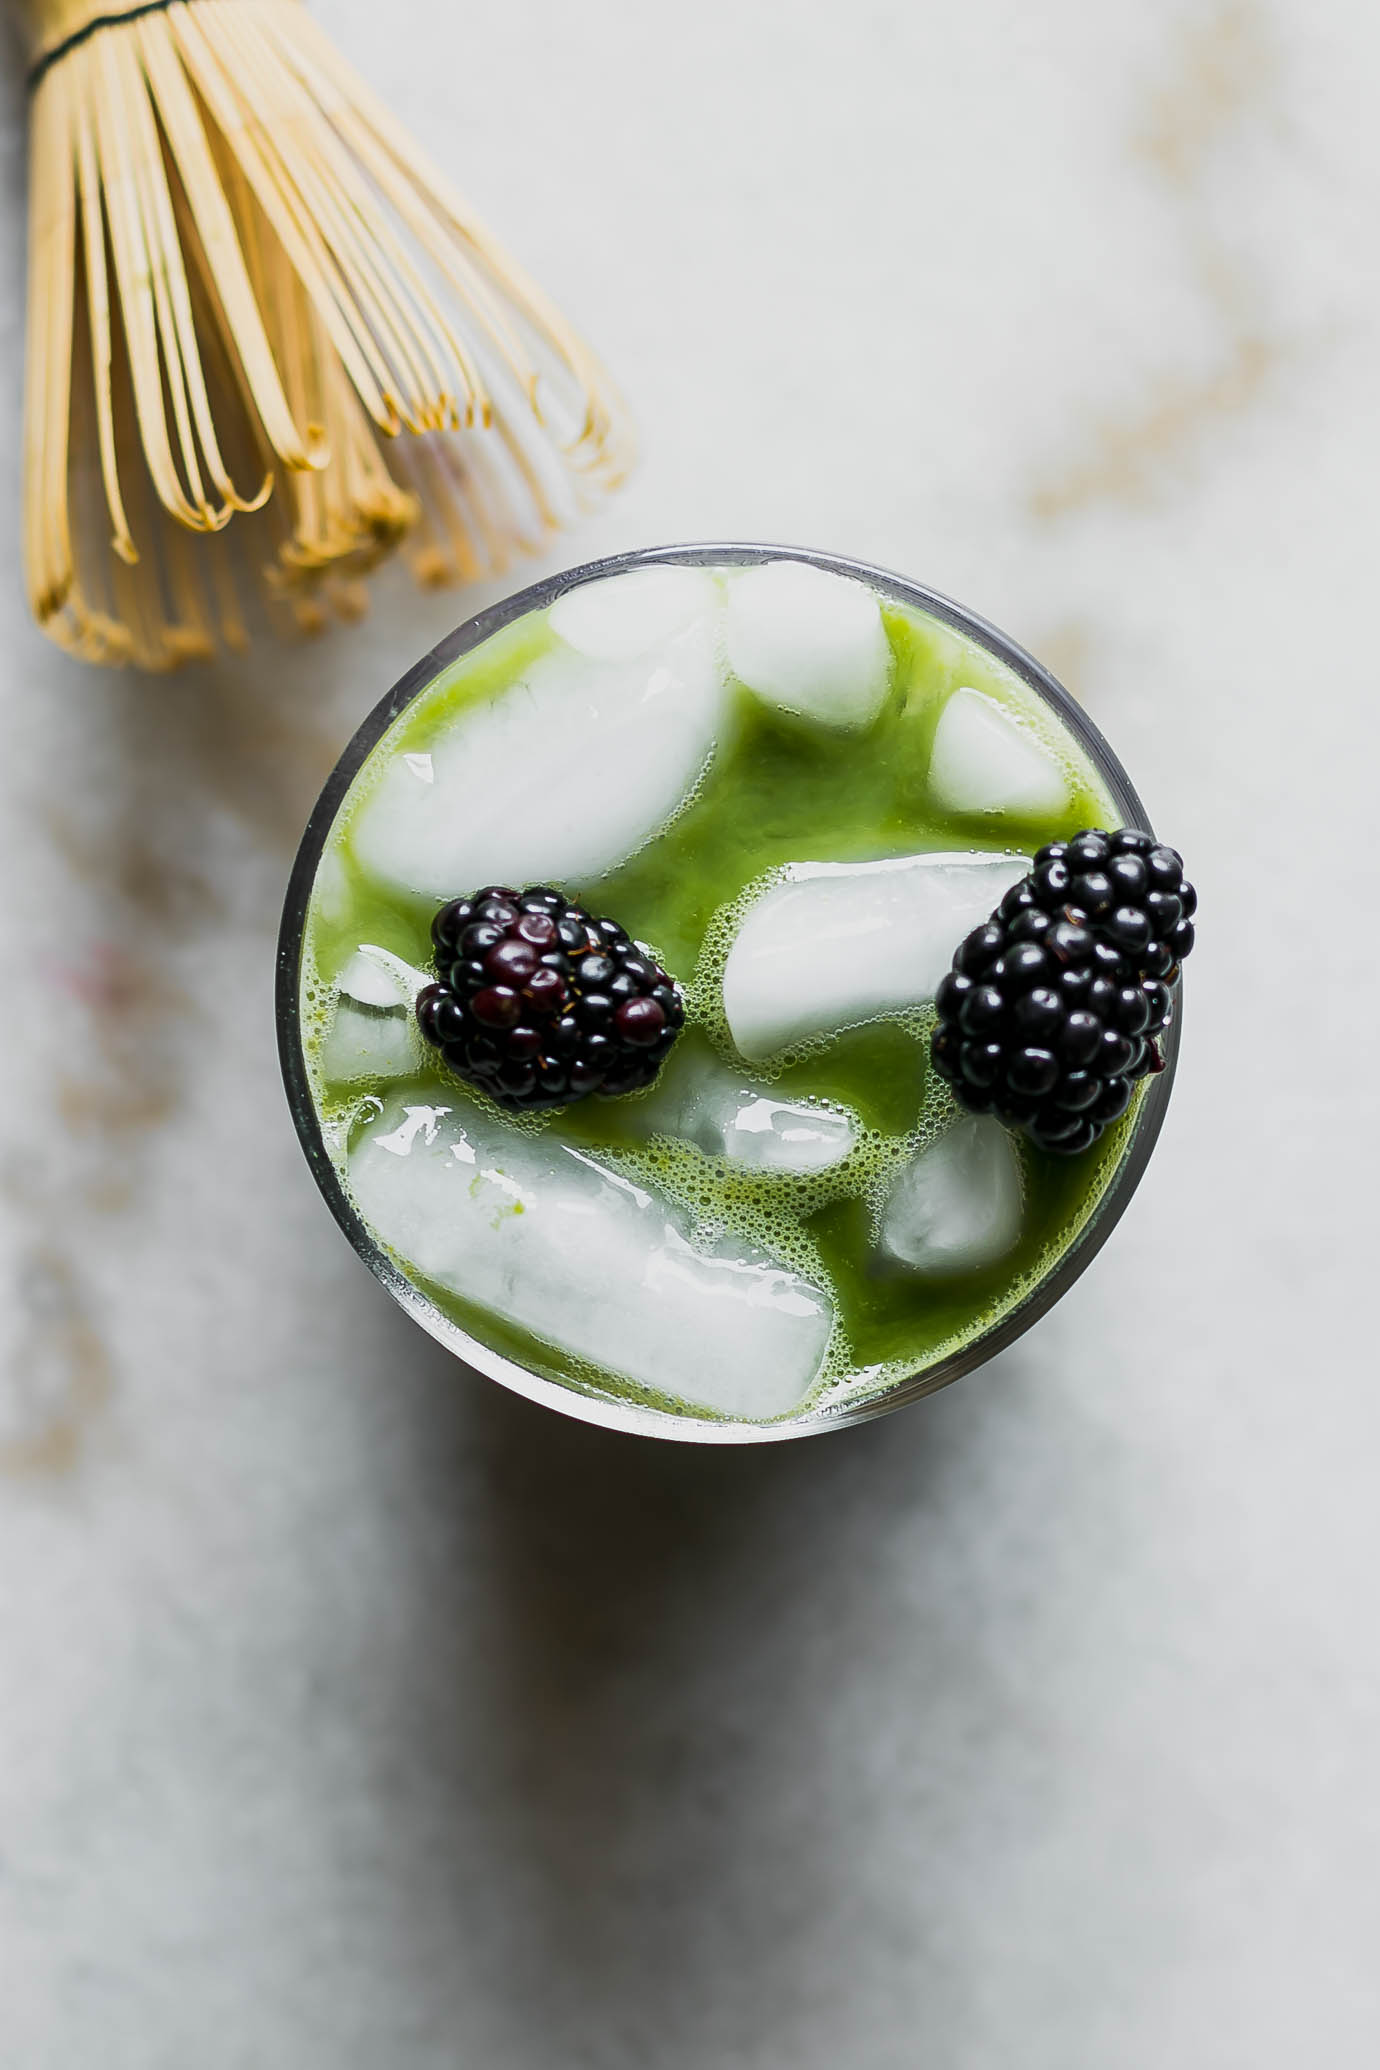 a close up photo of a green matcha iced latte with blackberry syrup and two blackberries as garnish on top